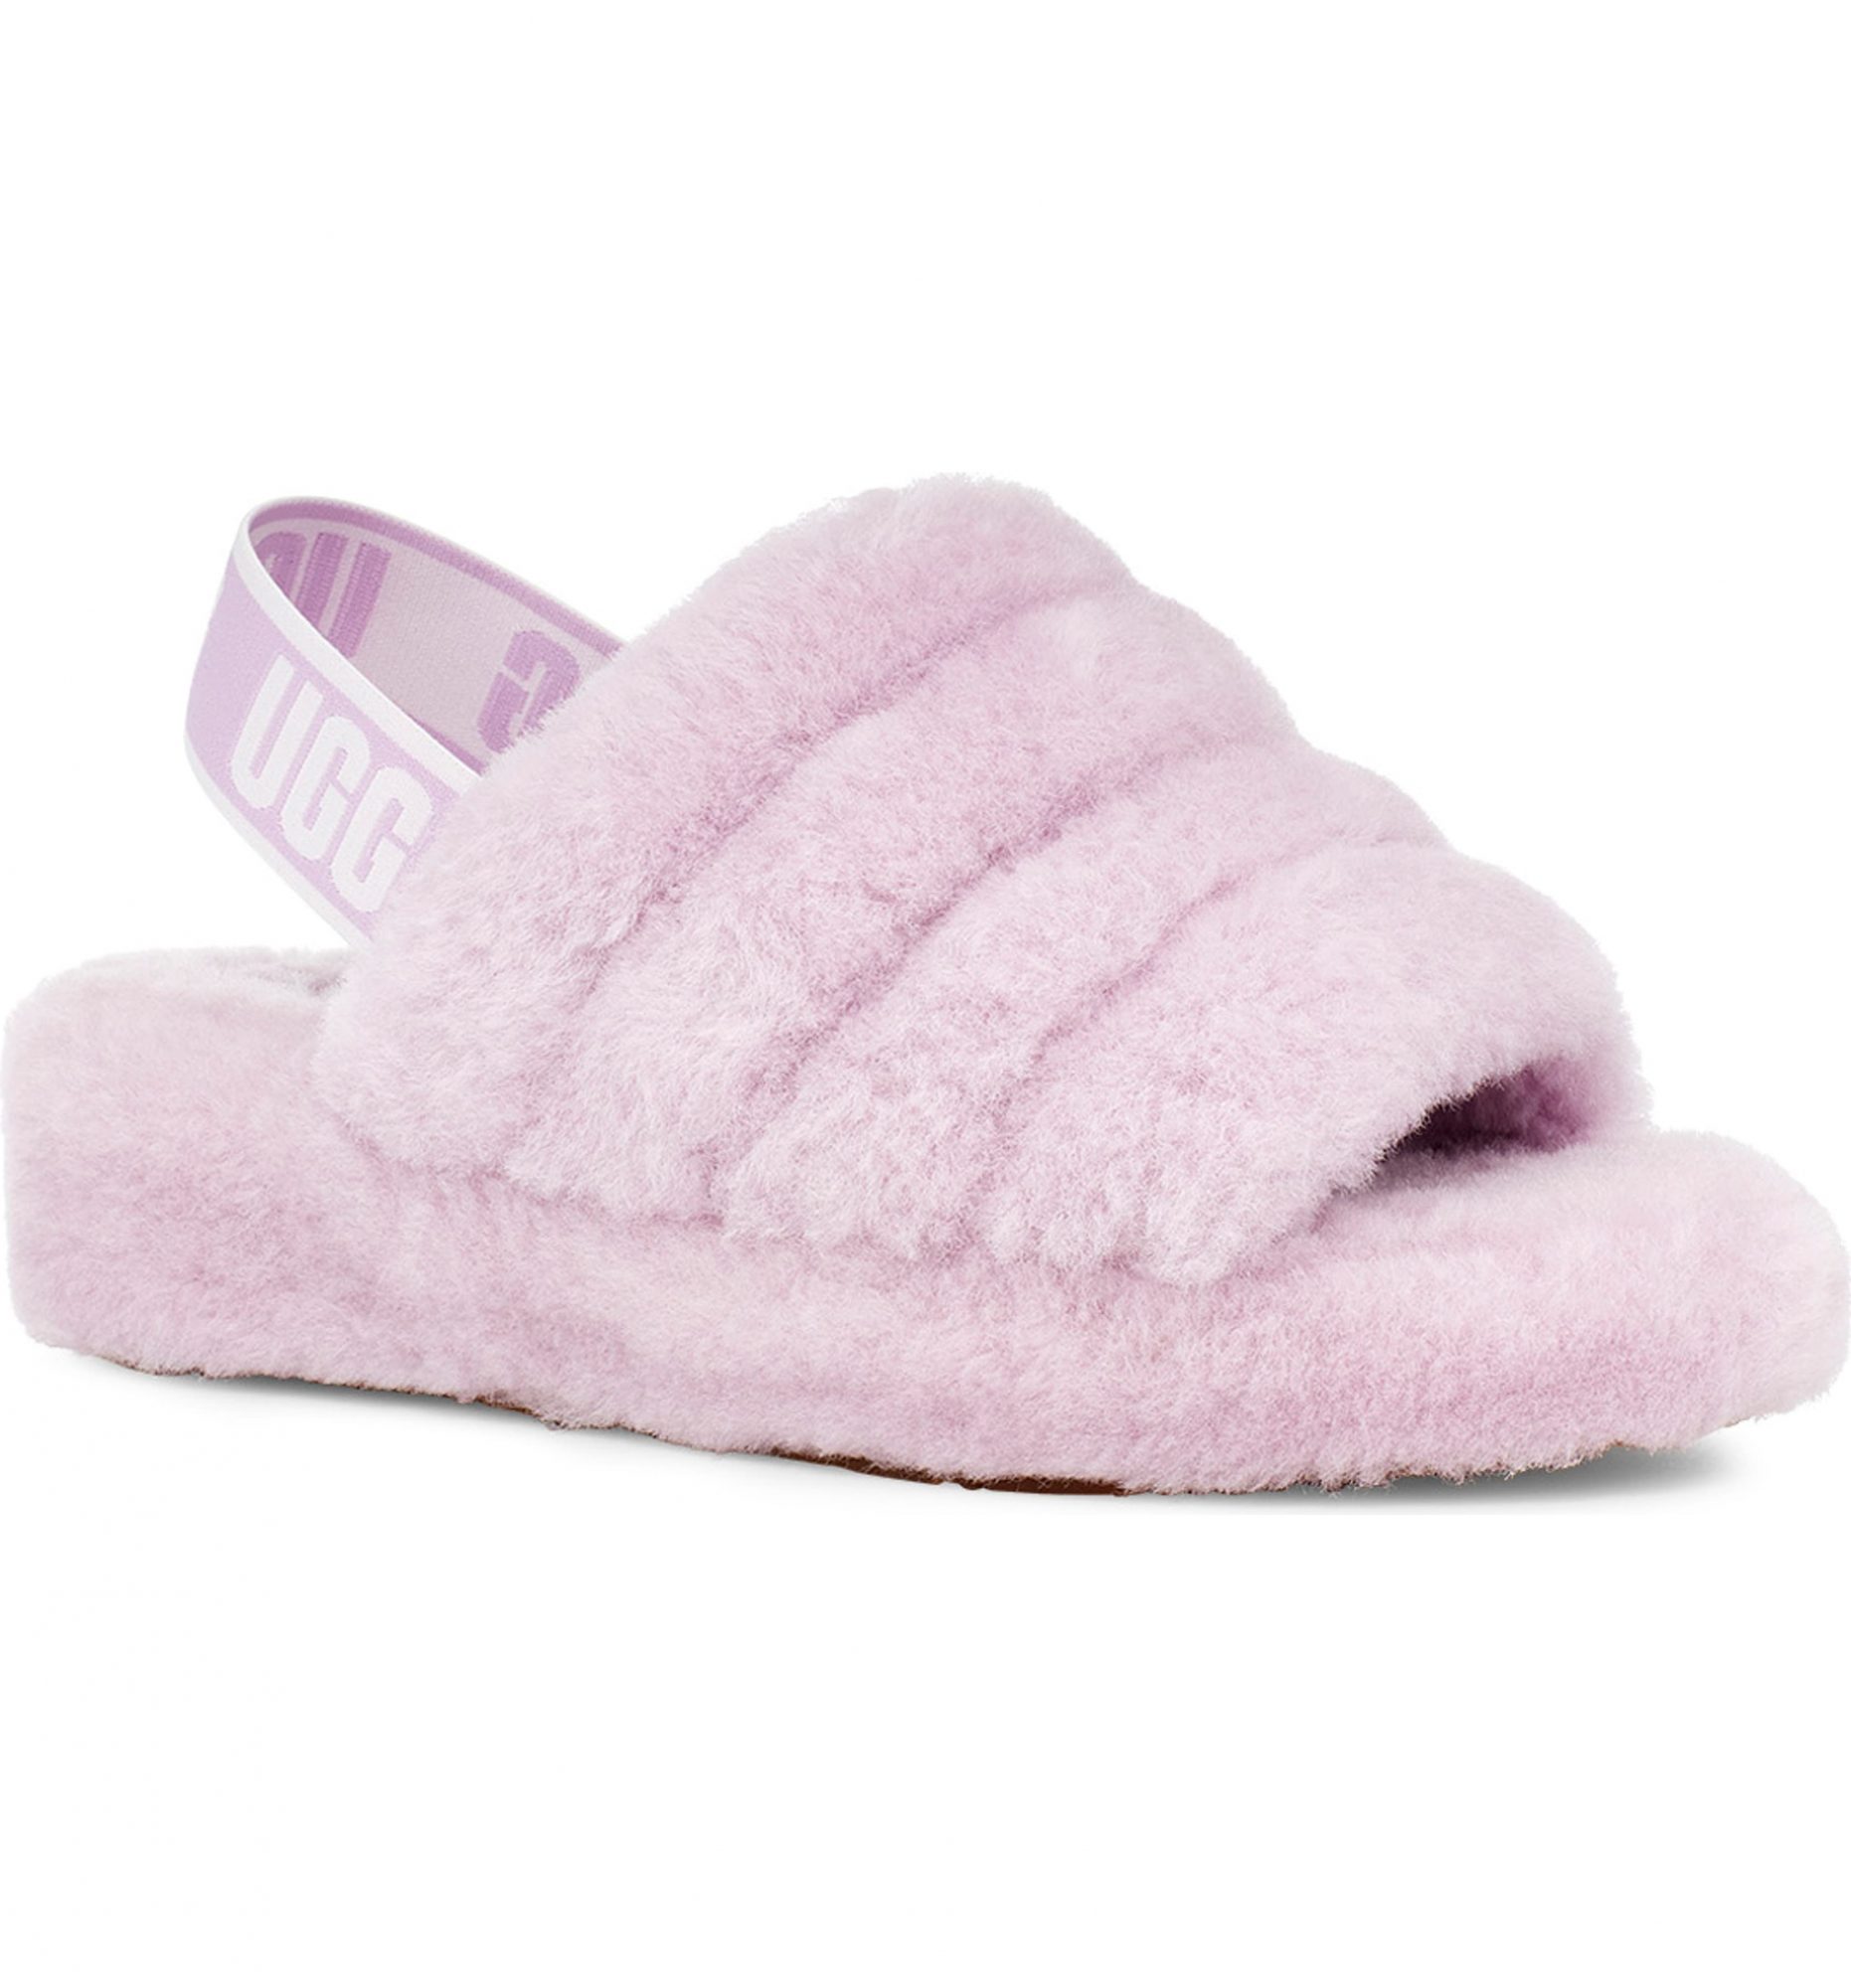 ugg slippers, mothers day gifts